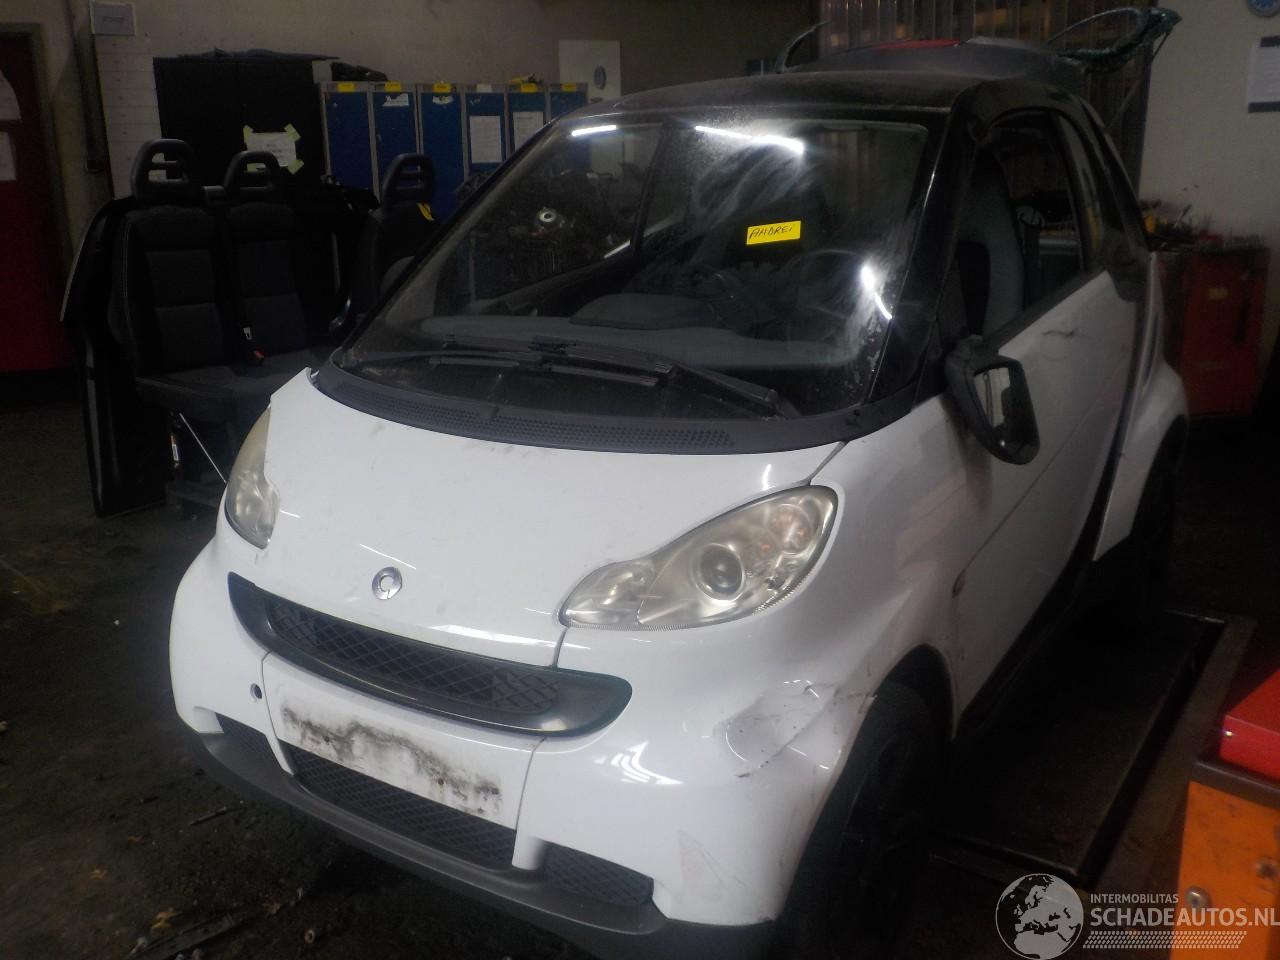 Smart Fortwo Fortwo Coupé (451.3) Hatchback 1.0 52 KW (132.910) [52kW]  (01-2007/=
12-2012)